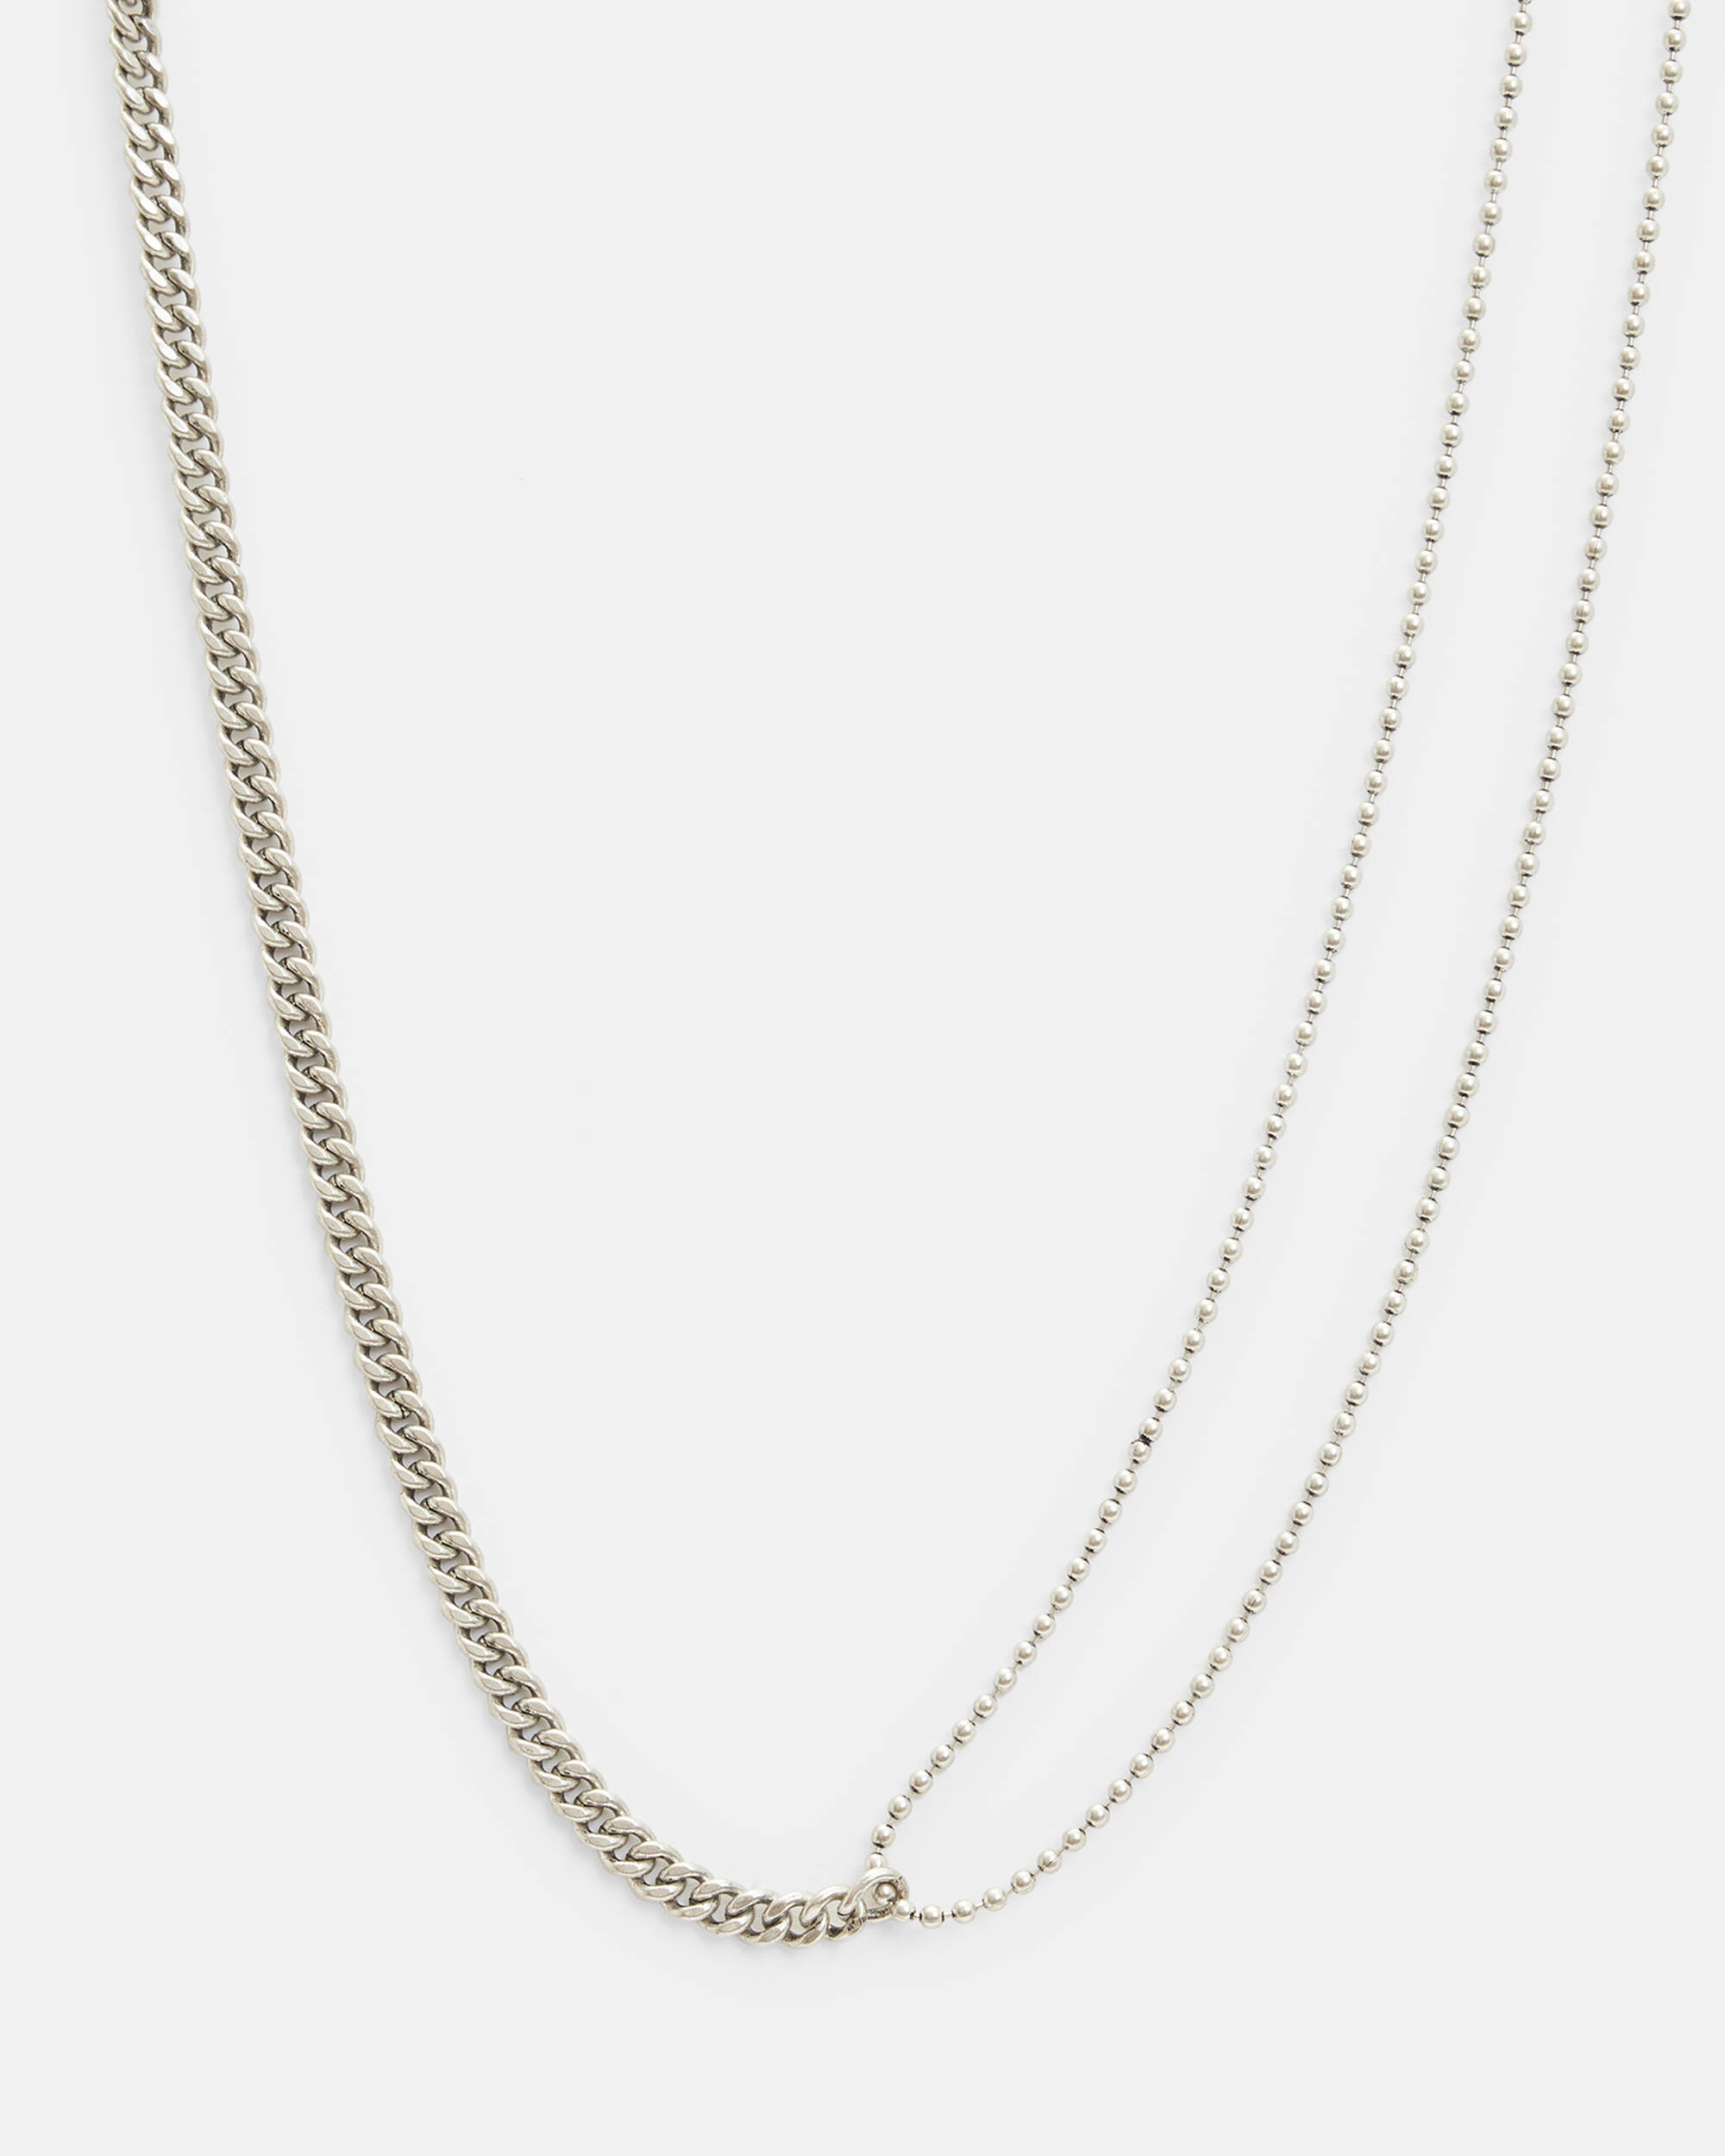 Cai Sterling Silver Mixed Chain Necklace